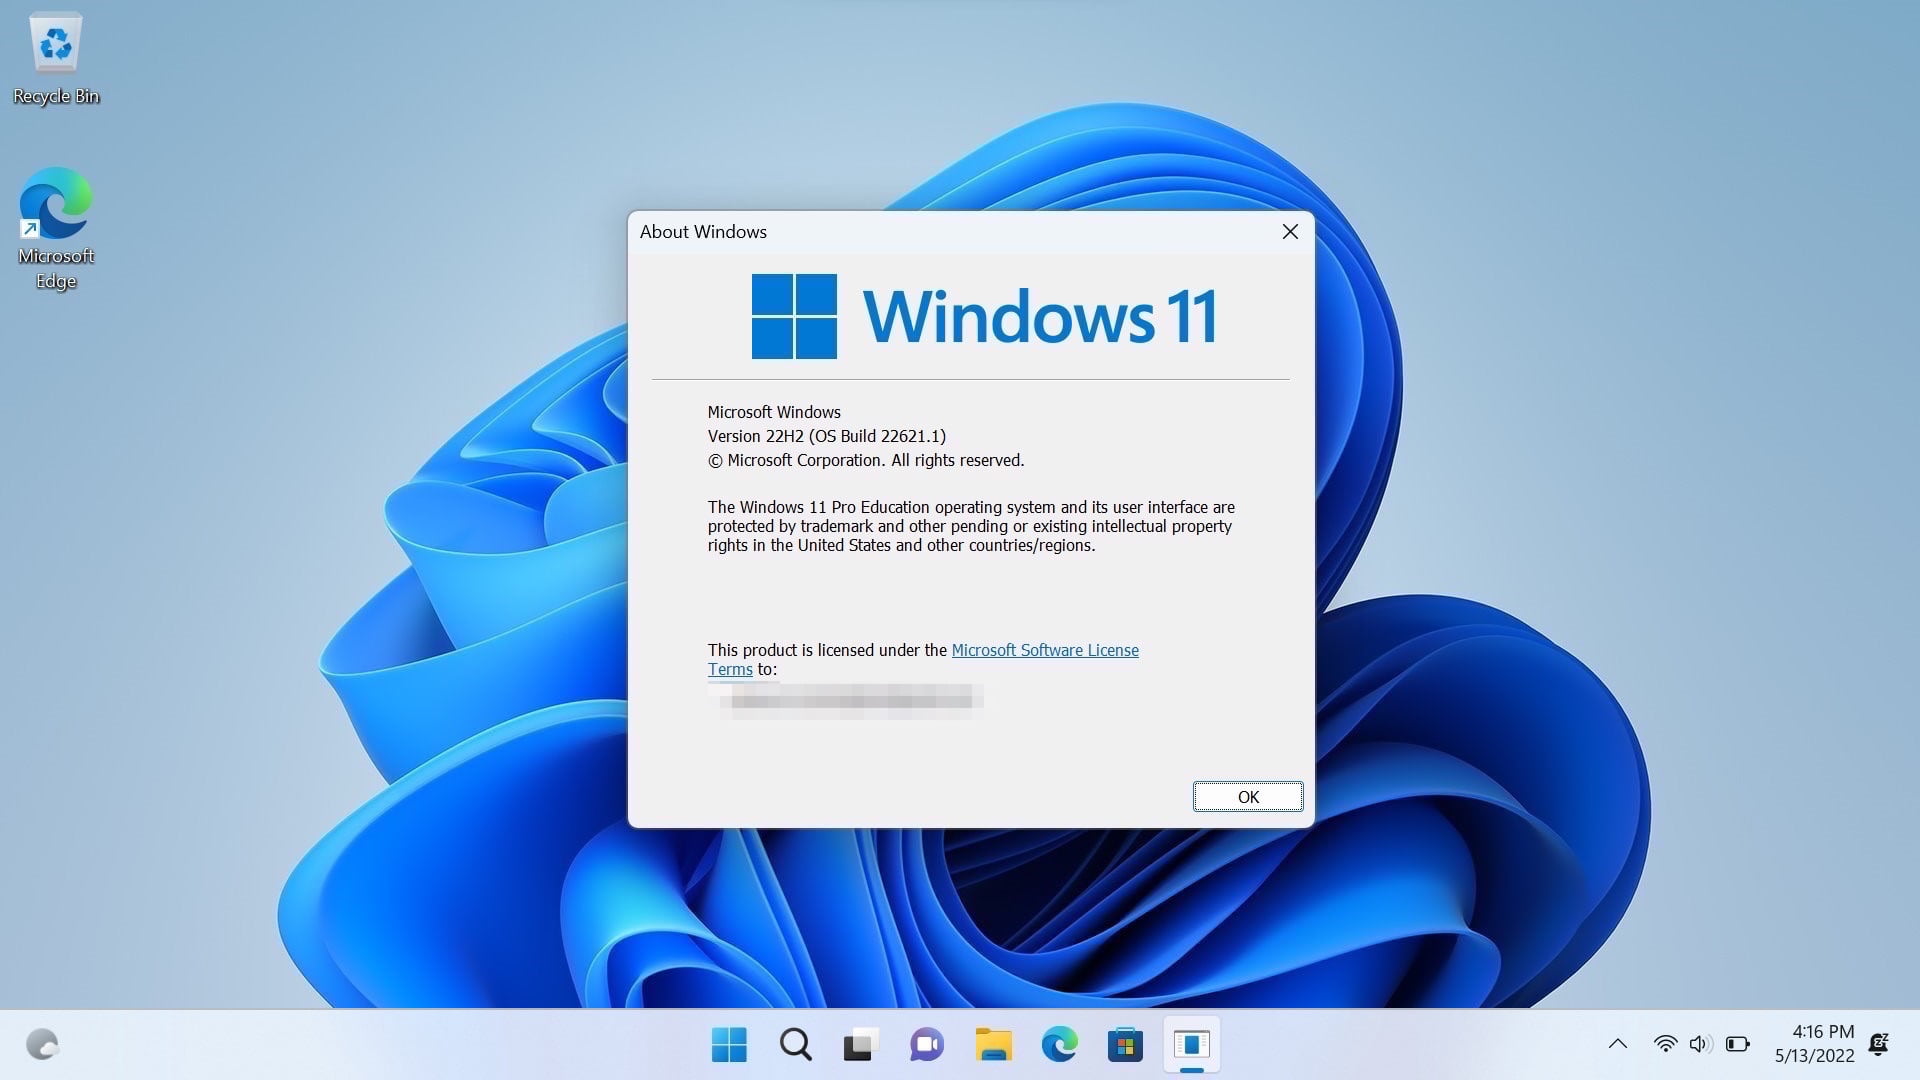 Windows 11 Version 22H2: What's New and What You Need to Know